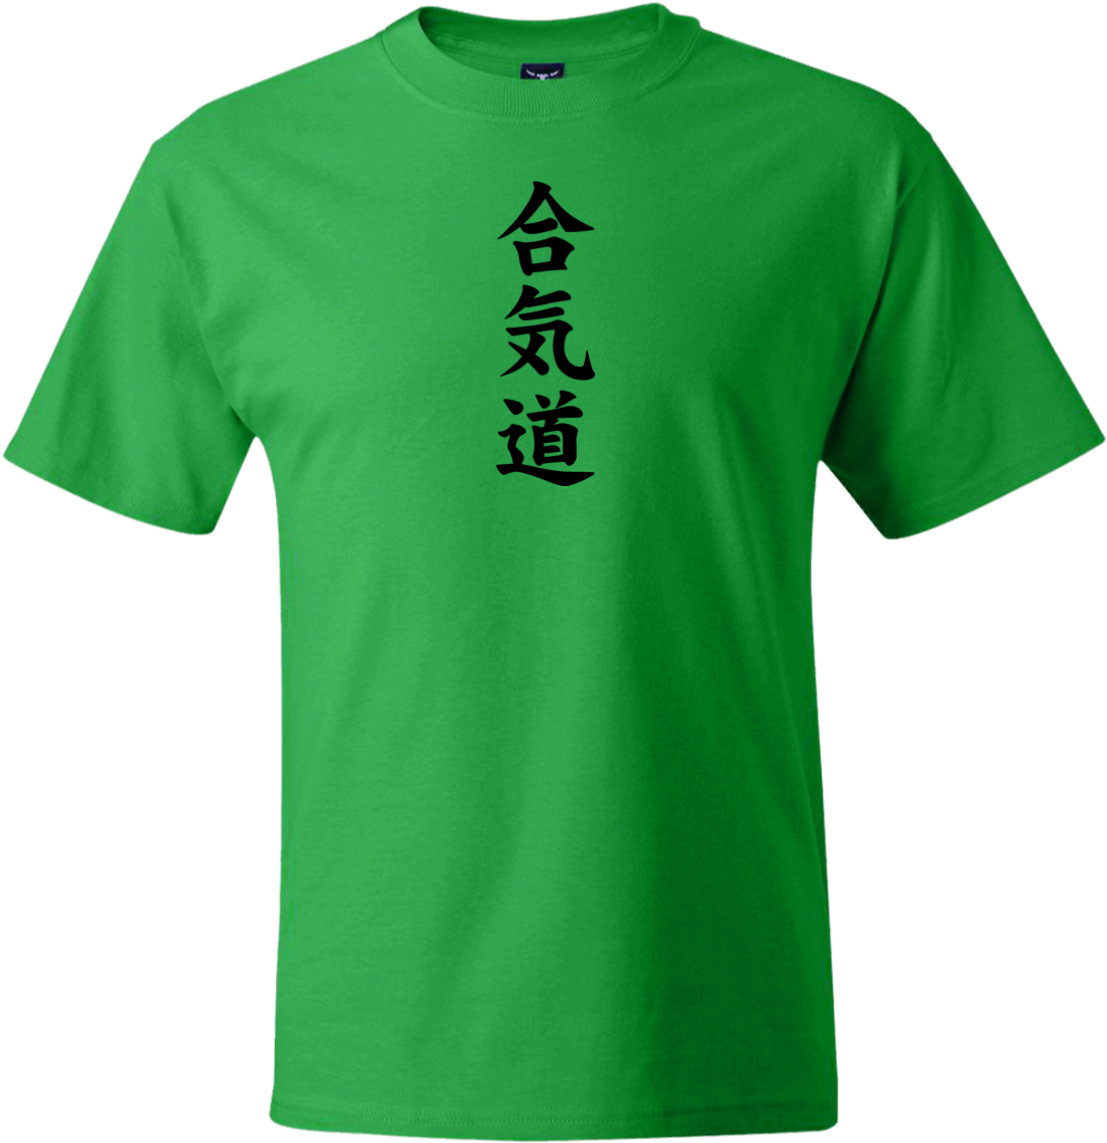 A Green Shirt With Black Text On It